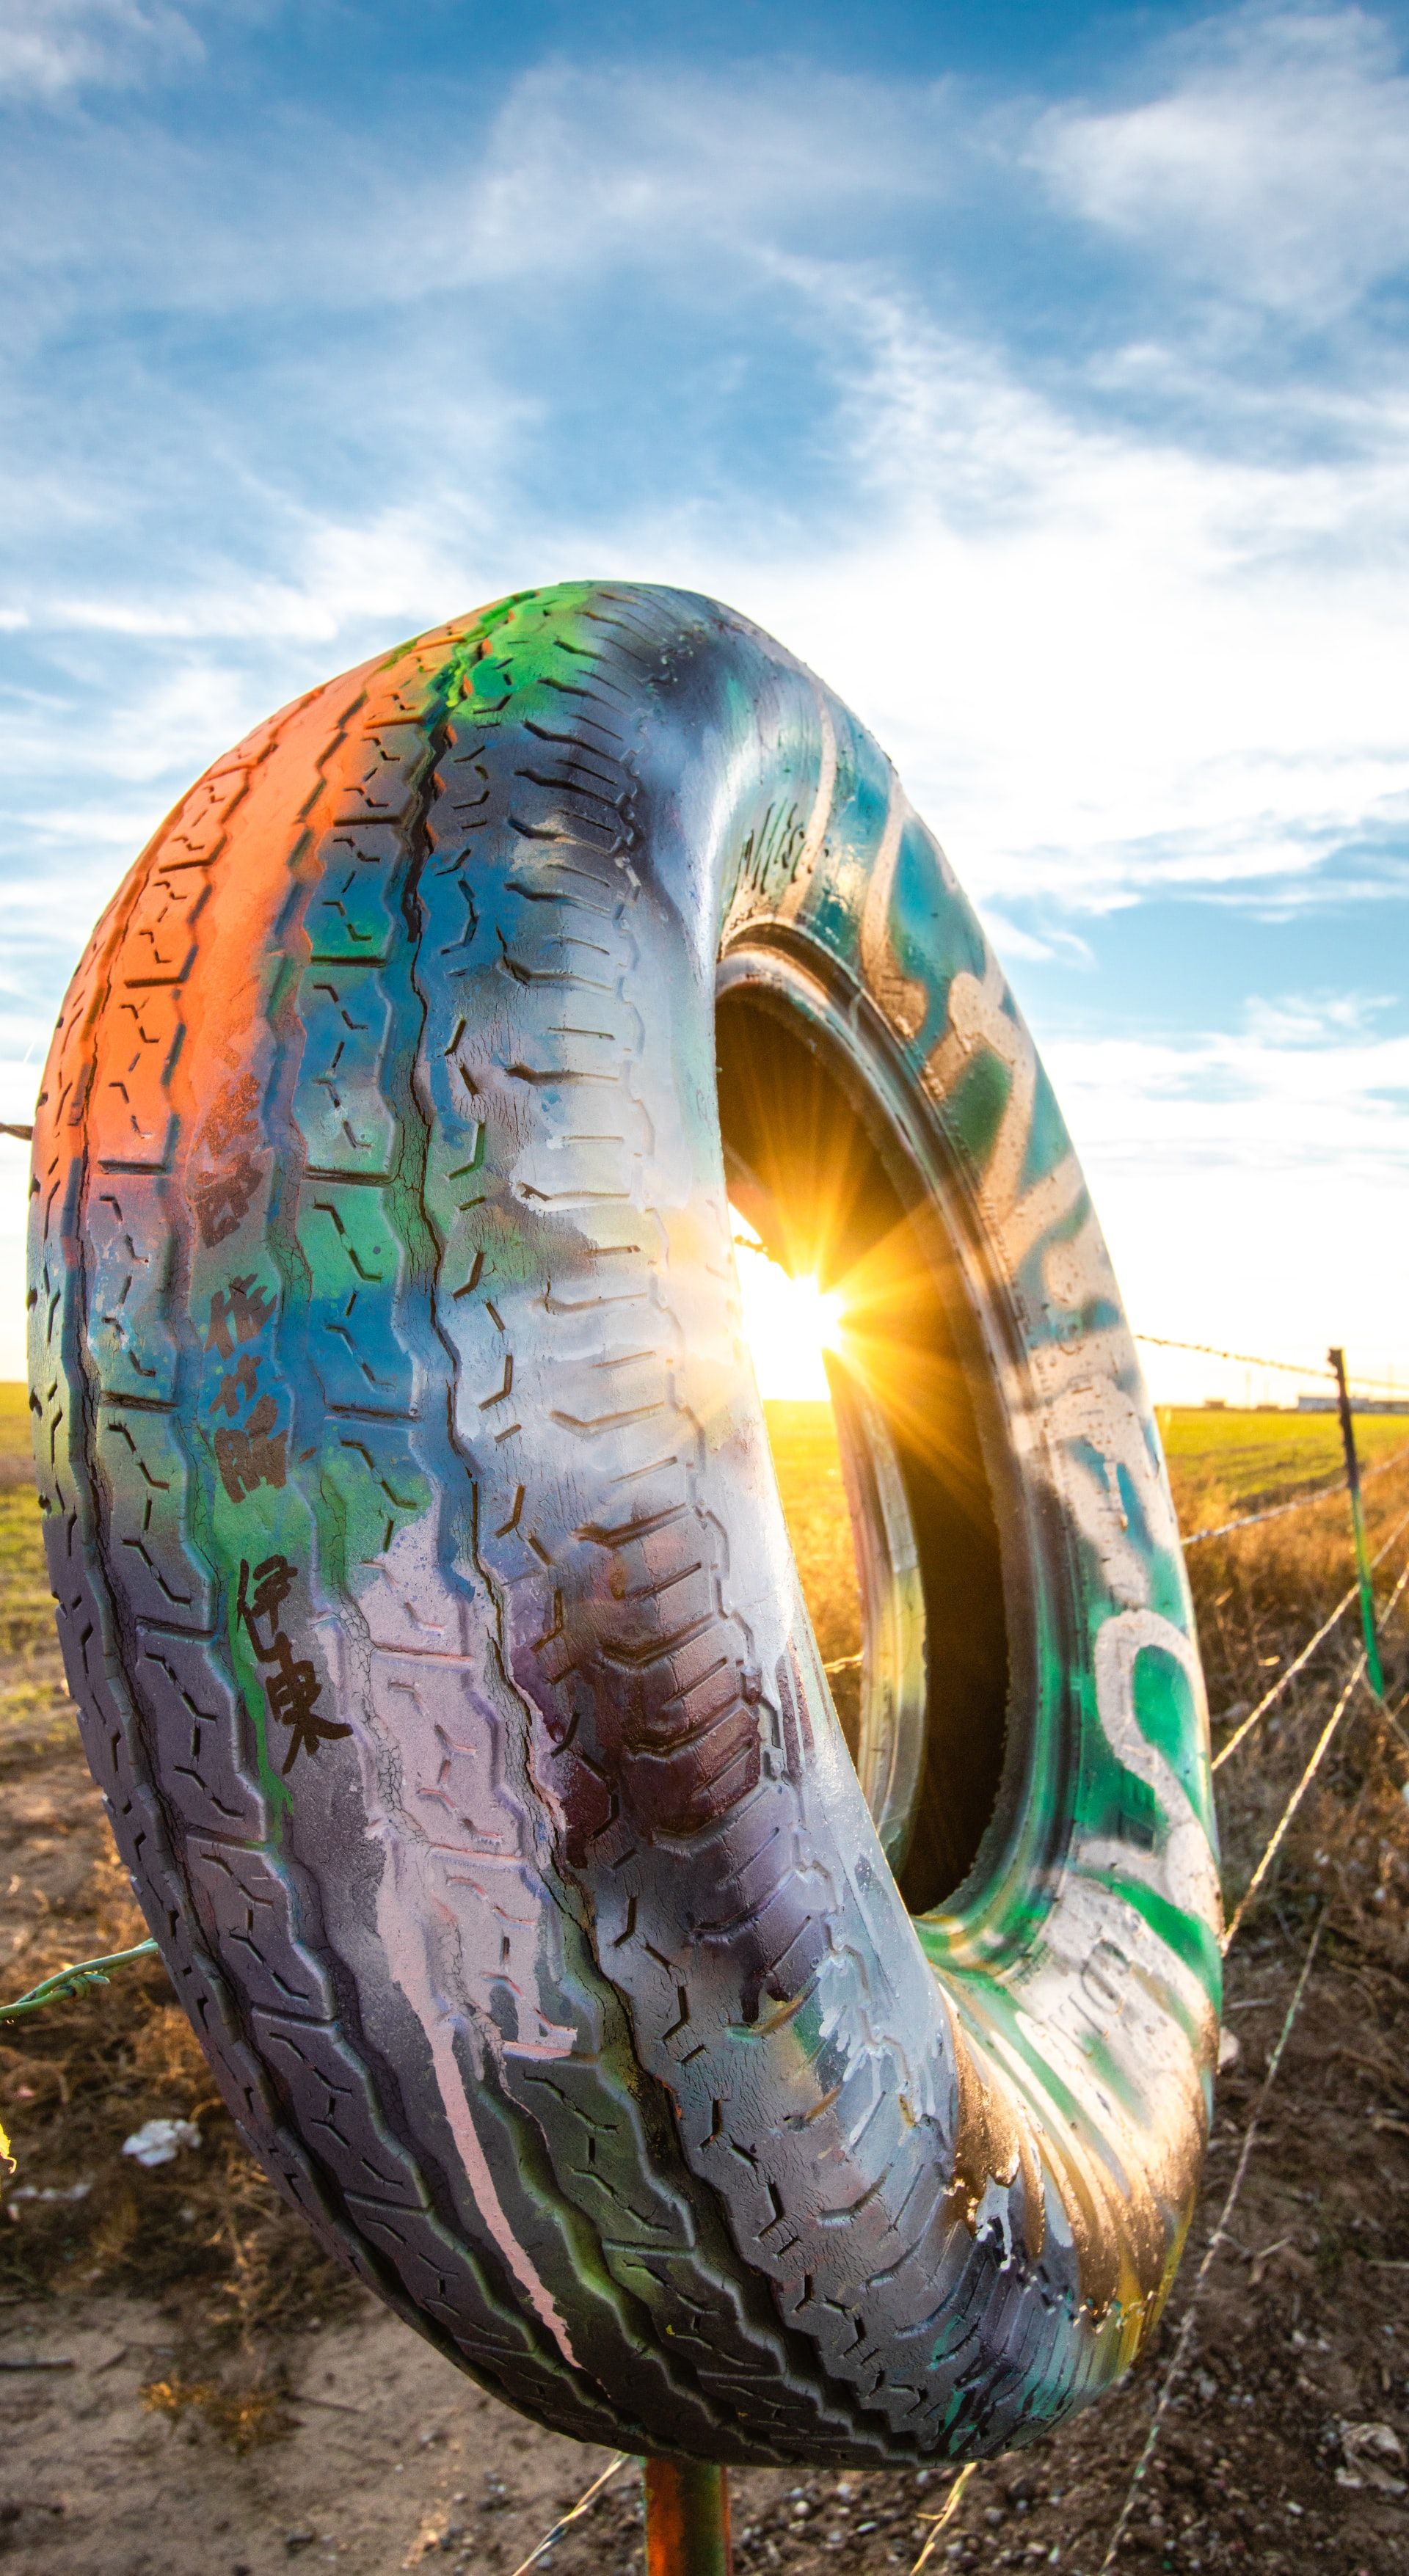 A tyre covered in graffiti art, a quirky roadside attraction in the US